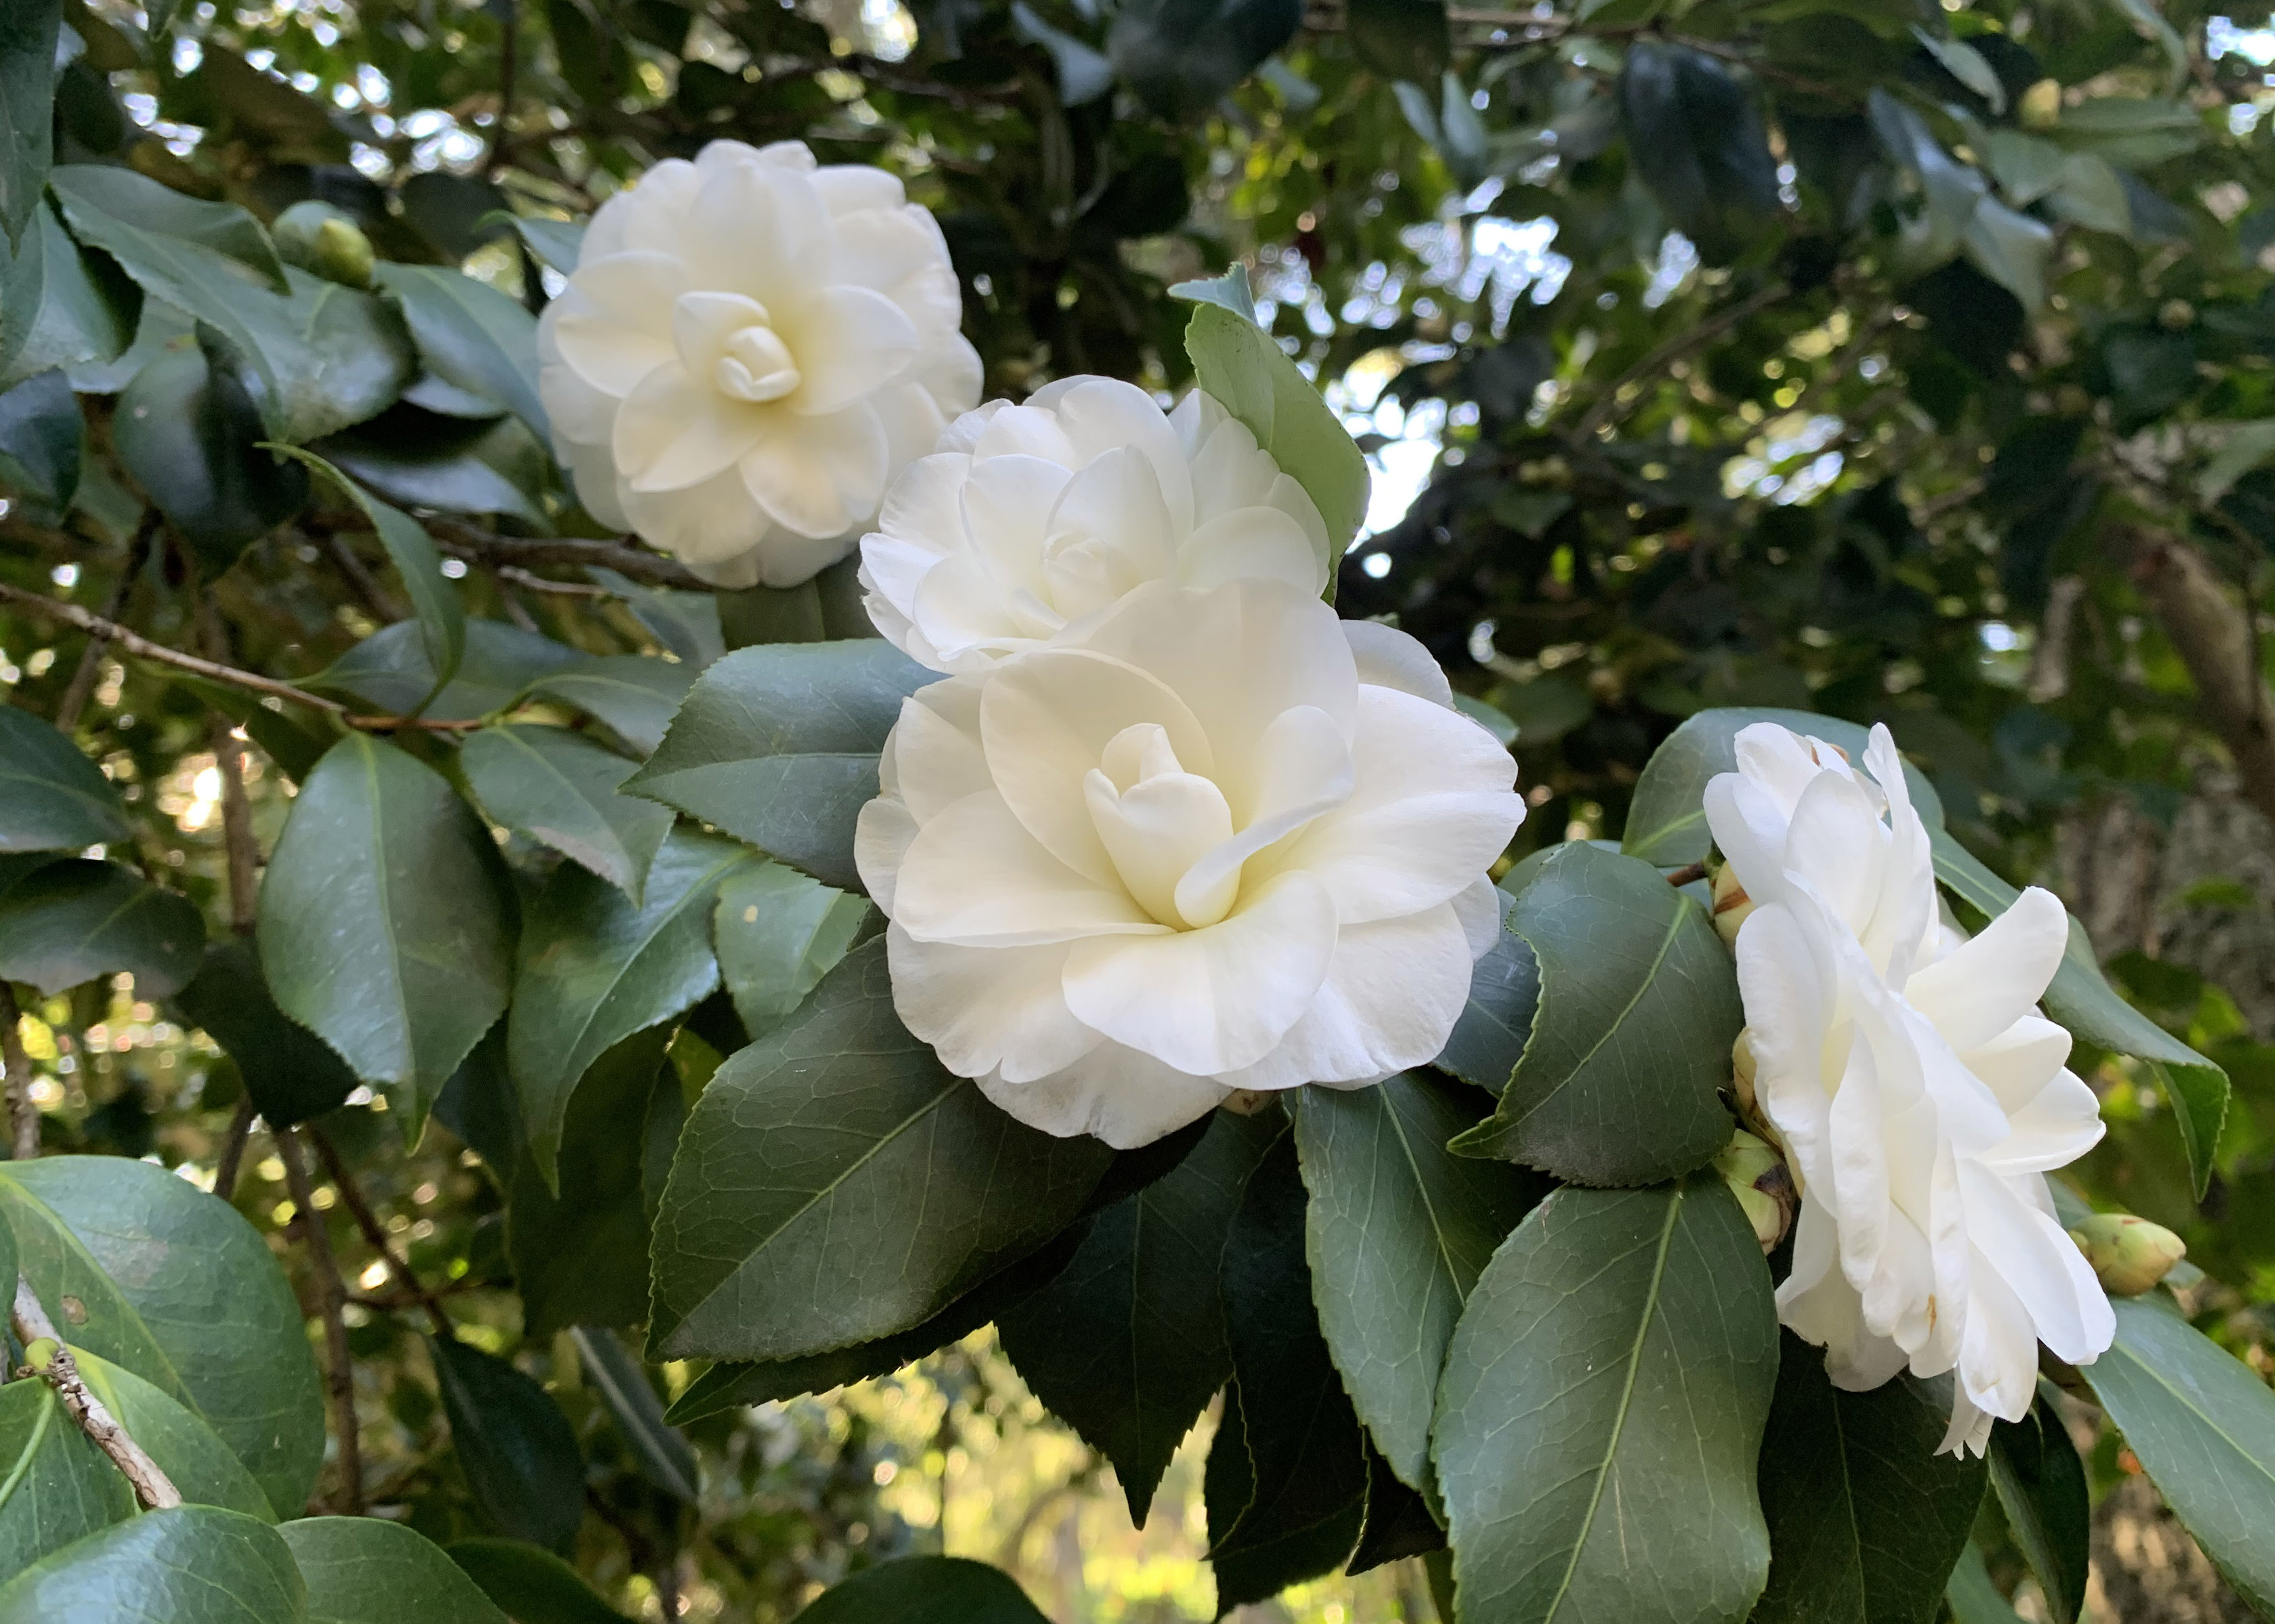 Descanso Gardens - The #Chanel camellia is blooming 🌼 Synonymous with the  CHANEL brand, #Camellia japonica #AlbaPlena was said to be Coco Chanel's  favorite #flower. Loved for its minimalist, stately beauty, you